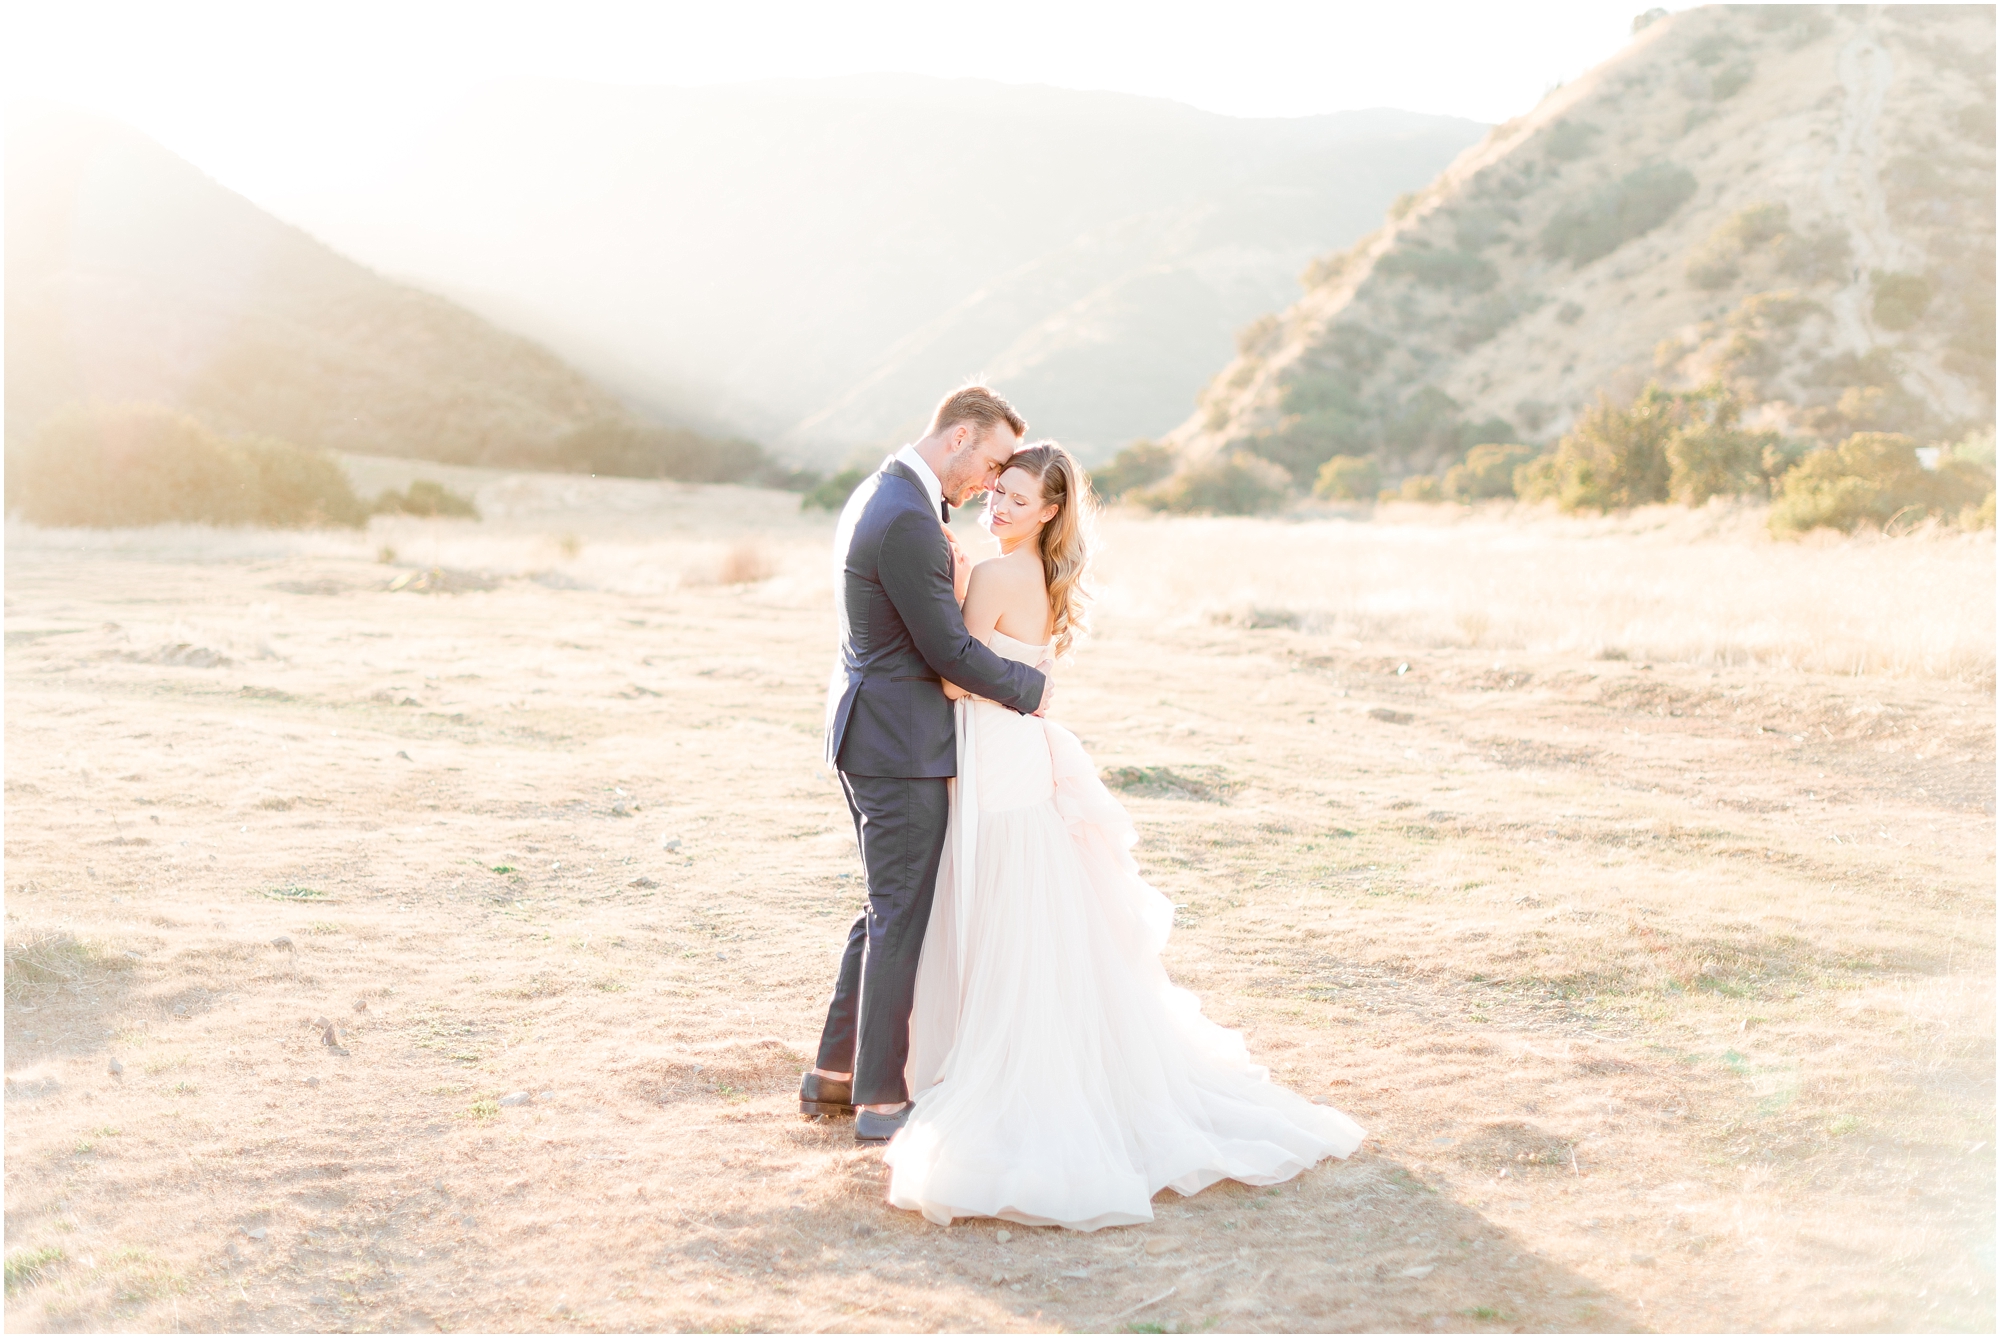 Wedding Photographer in temecula | bride and groom poses at sunset